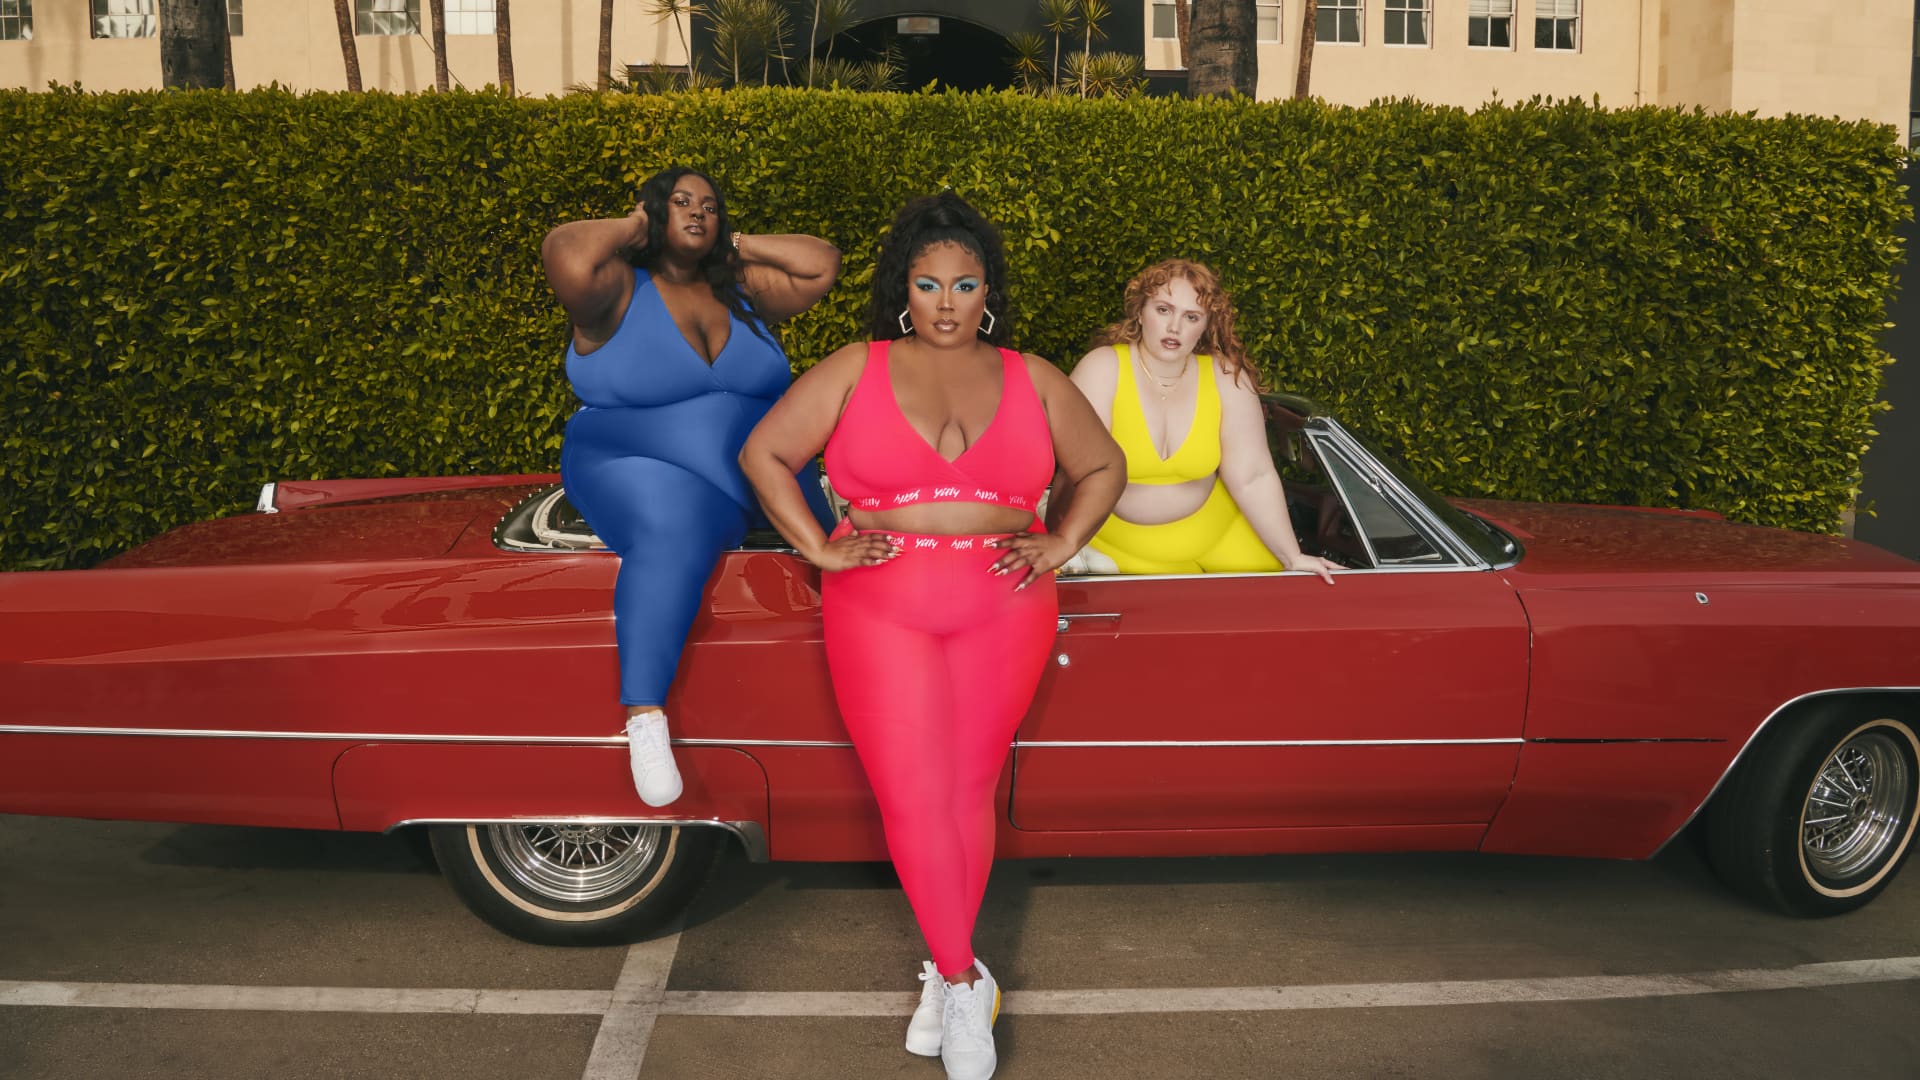 Lizzo launches Yitty shapewear brand in tie-up with Fabletics